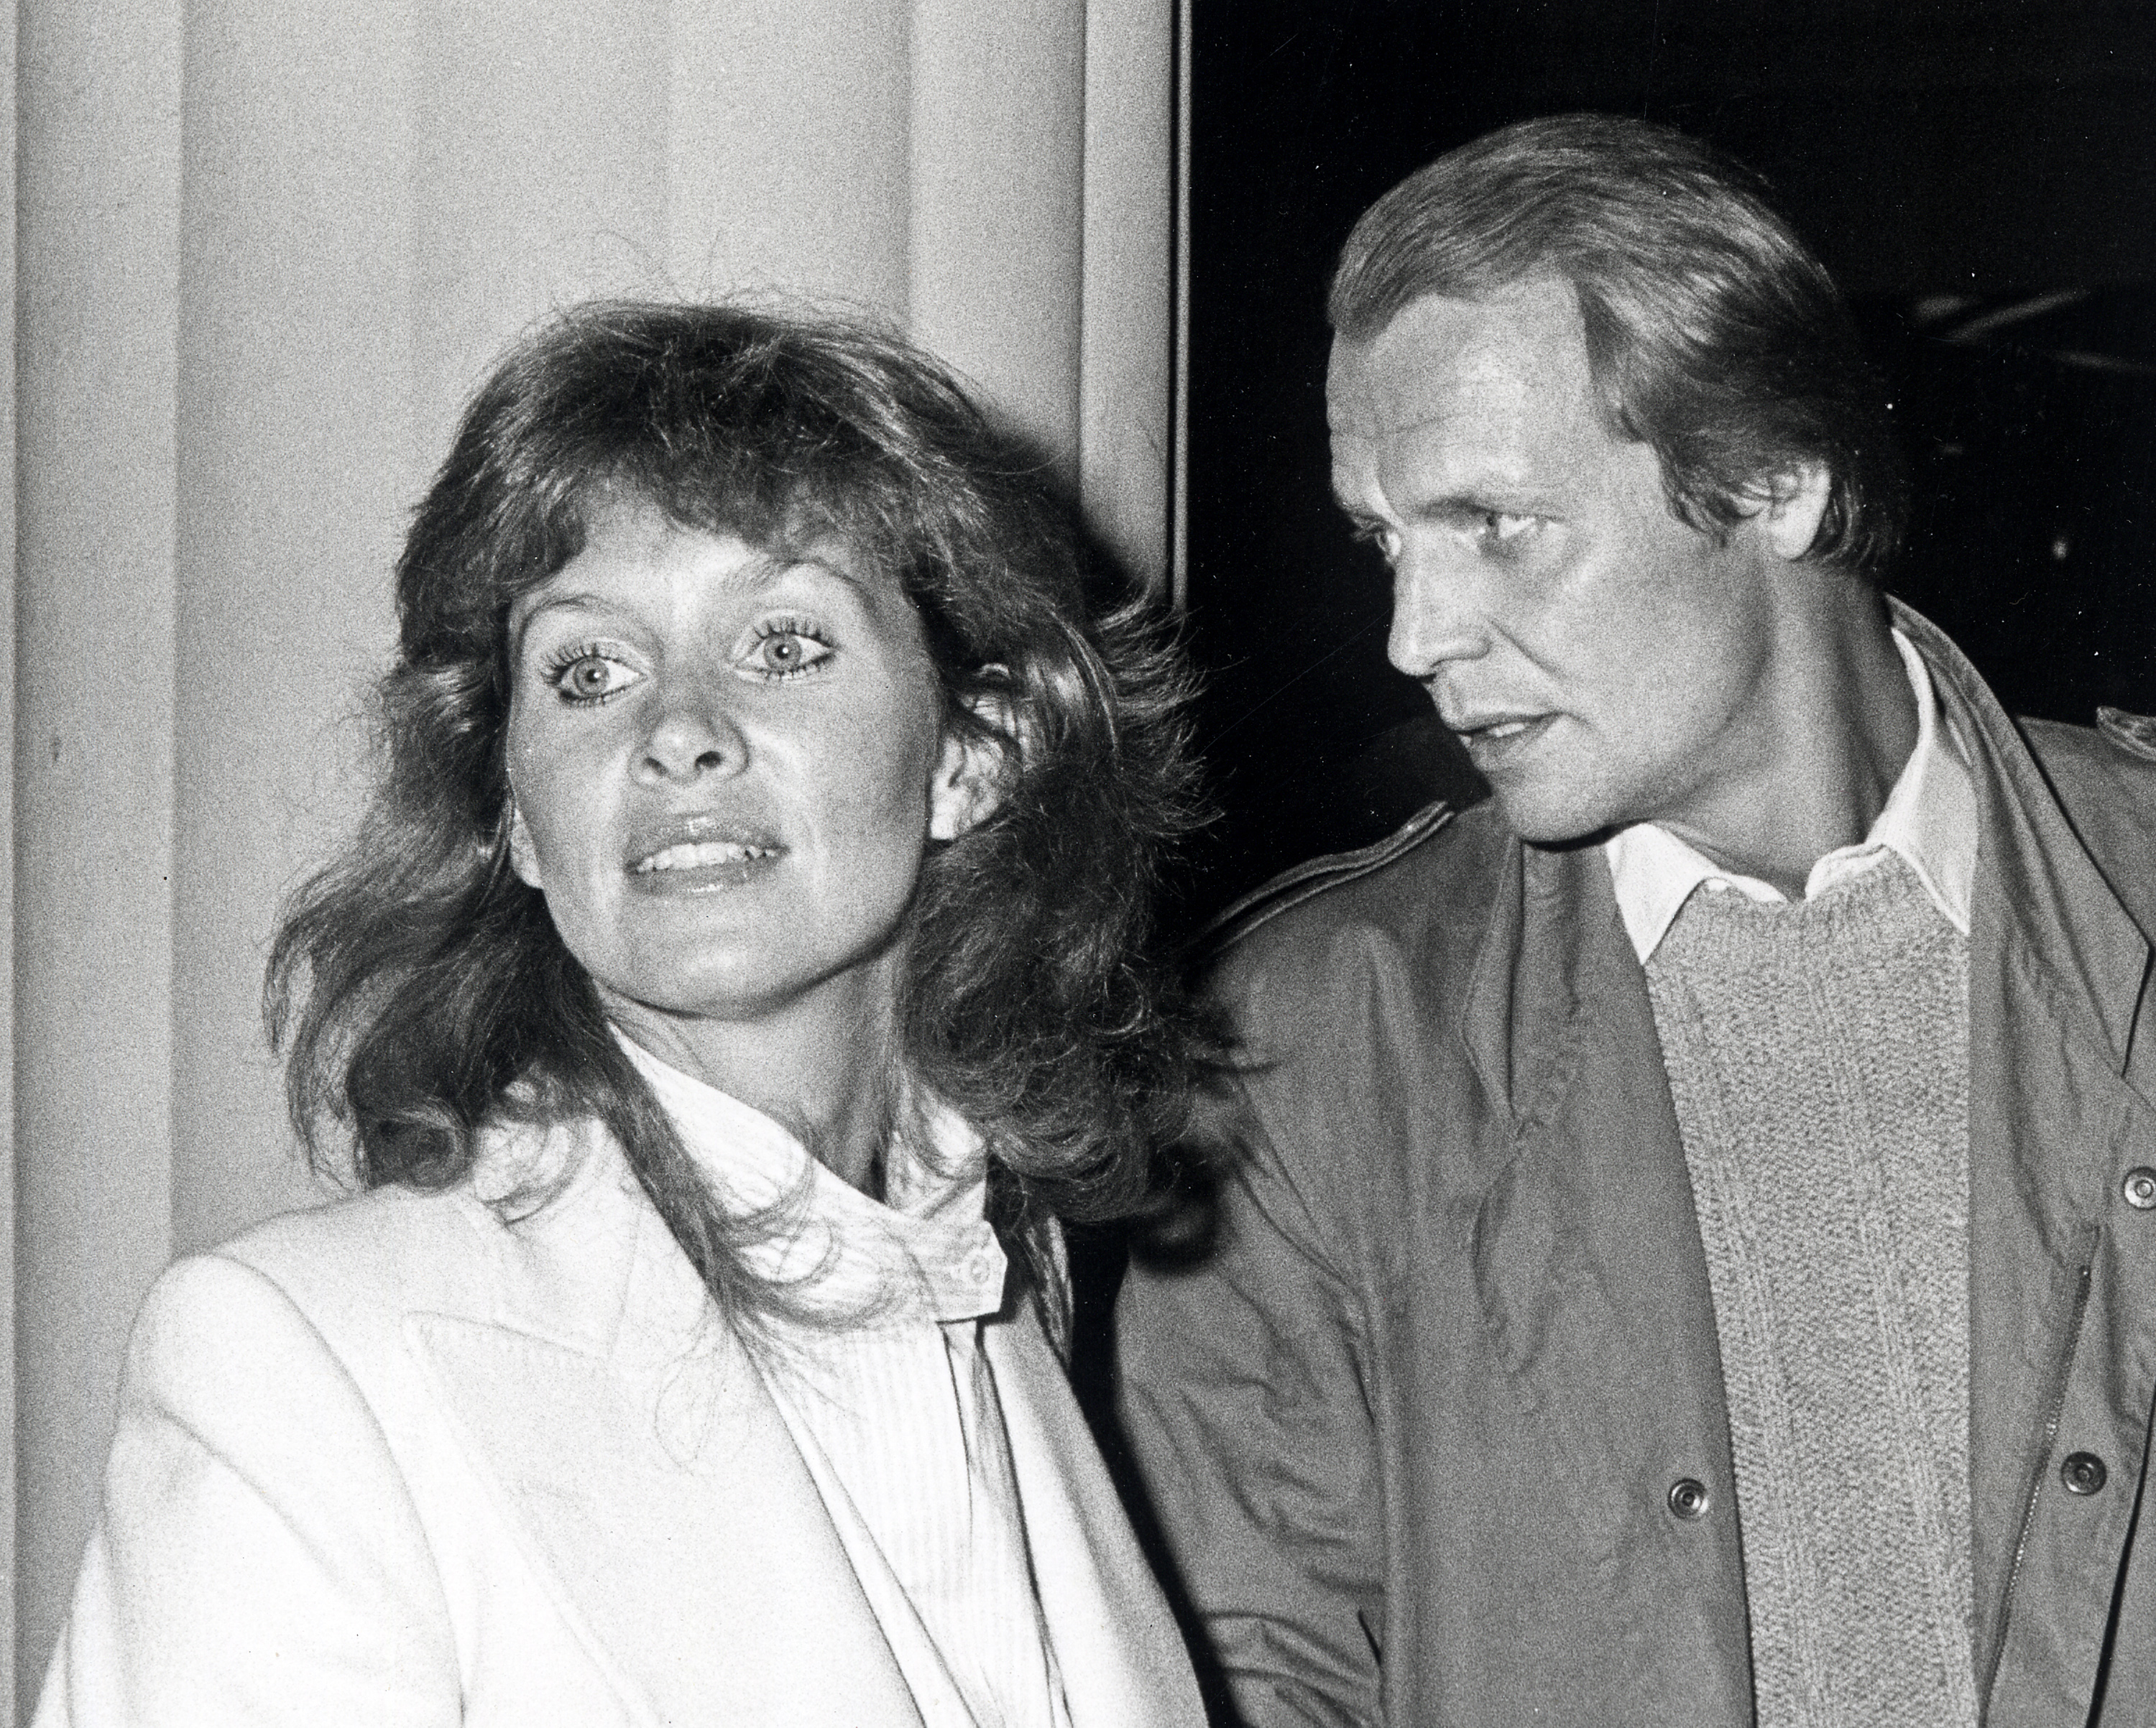 David Soul and Patty Sherman on April 19, 1983 at the Wilshire Theater in Beverly Hills, California Source: Getty Images